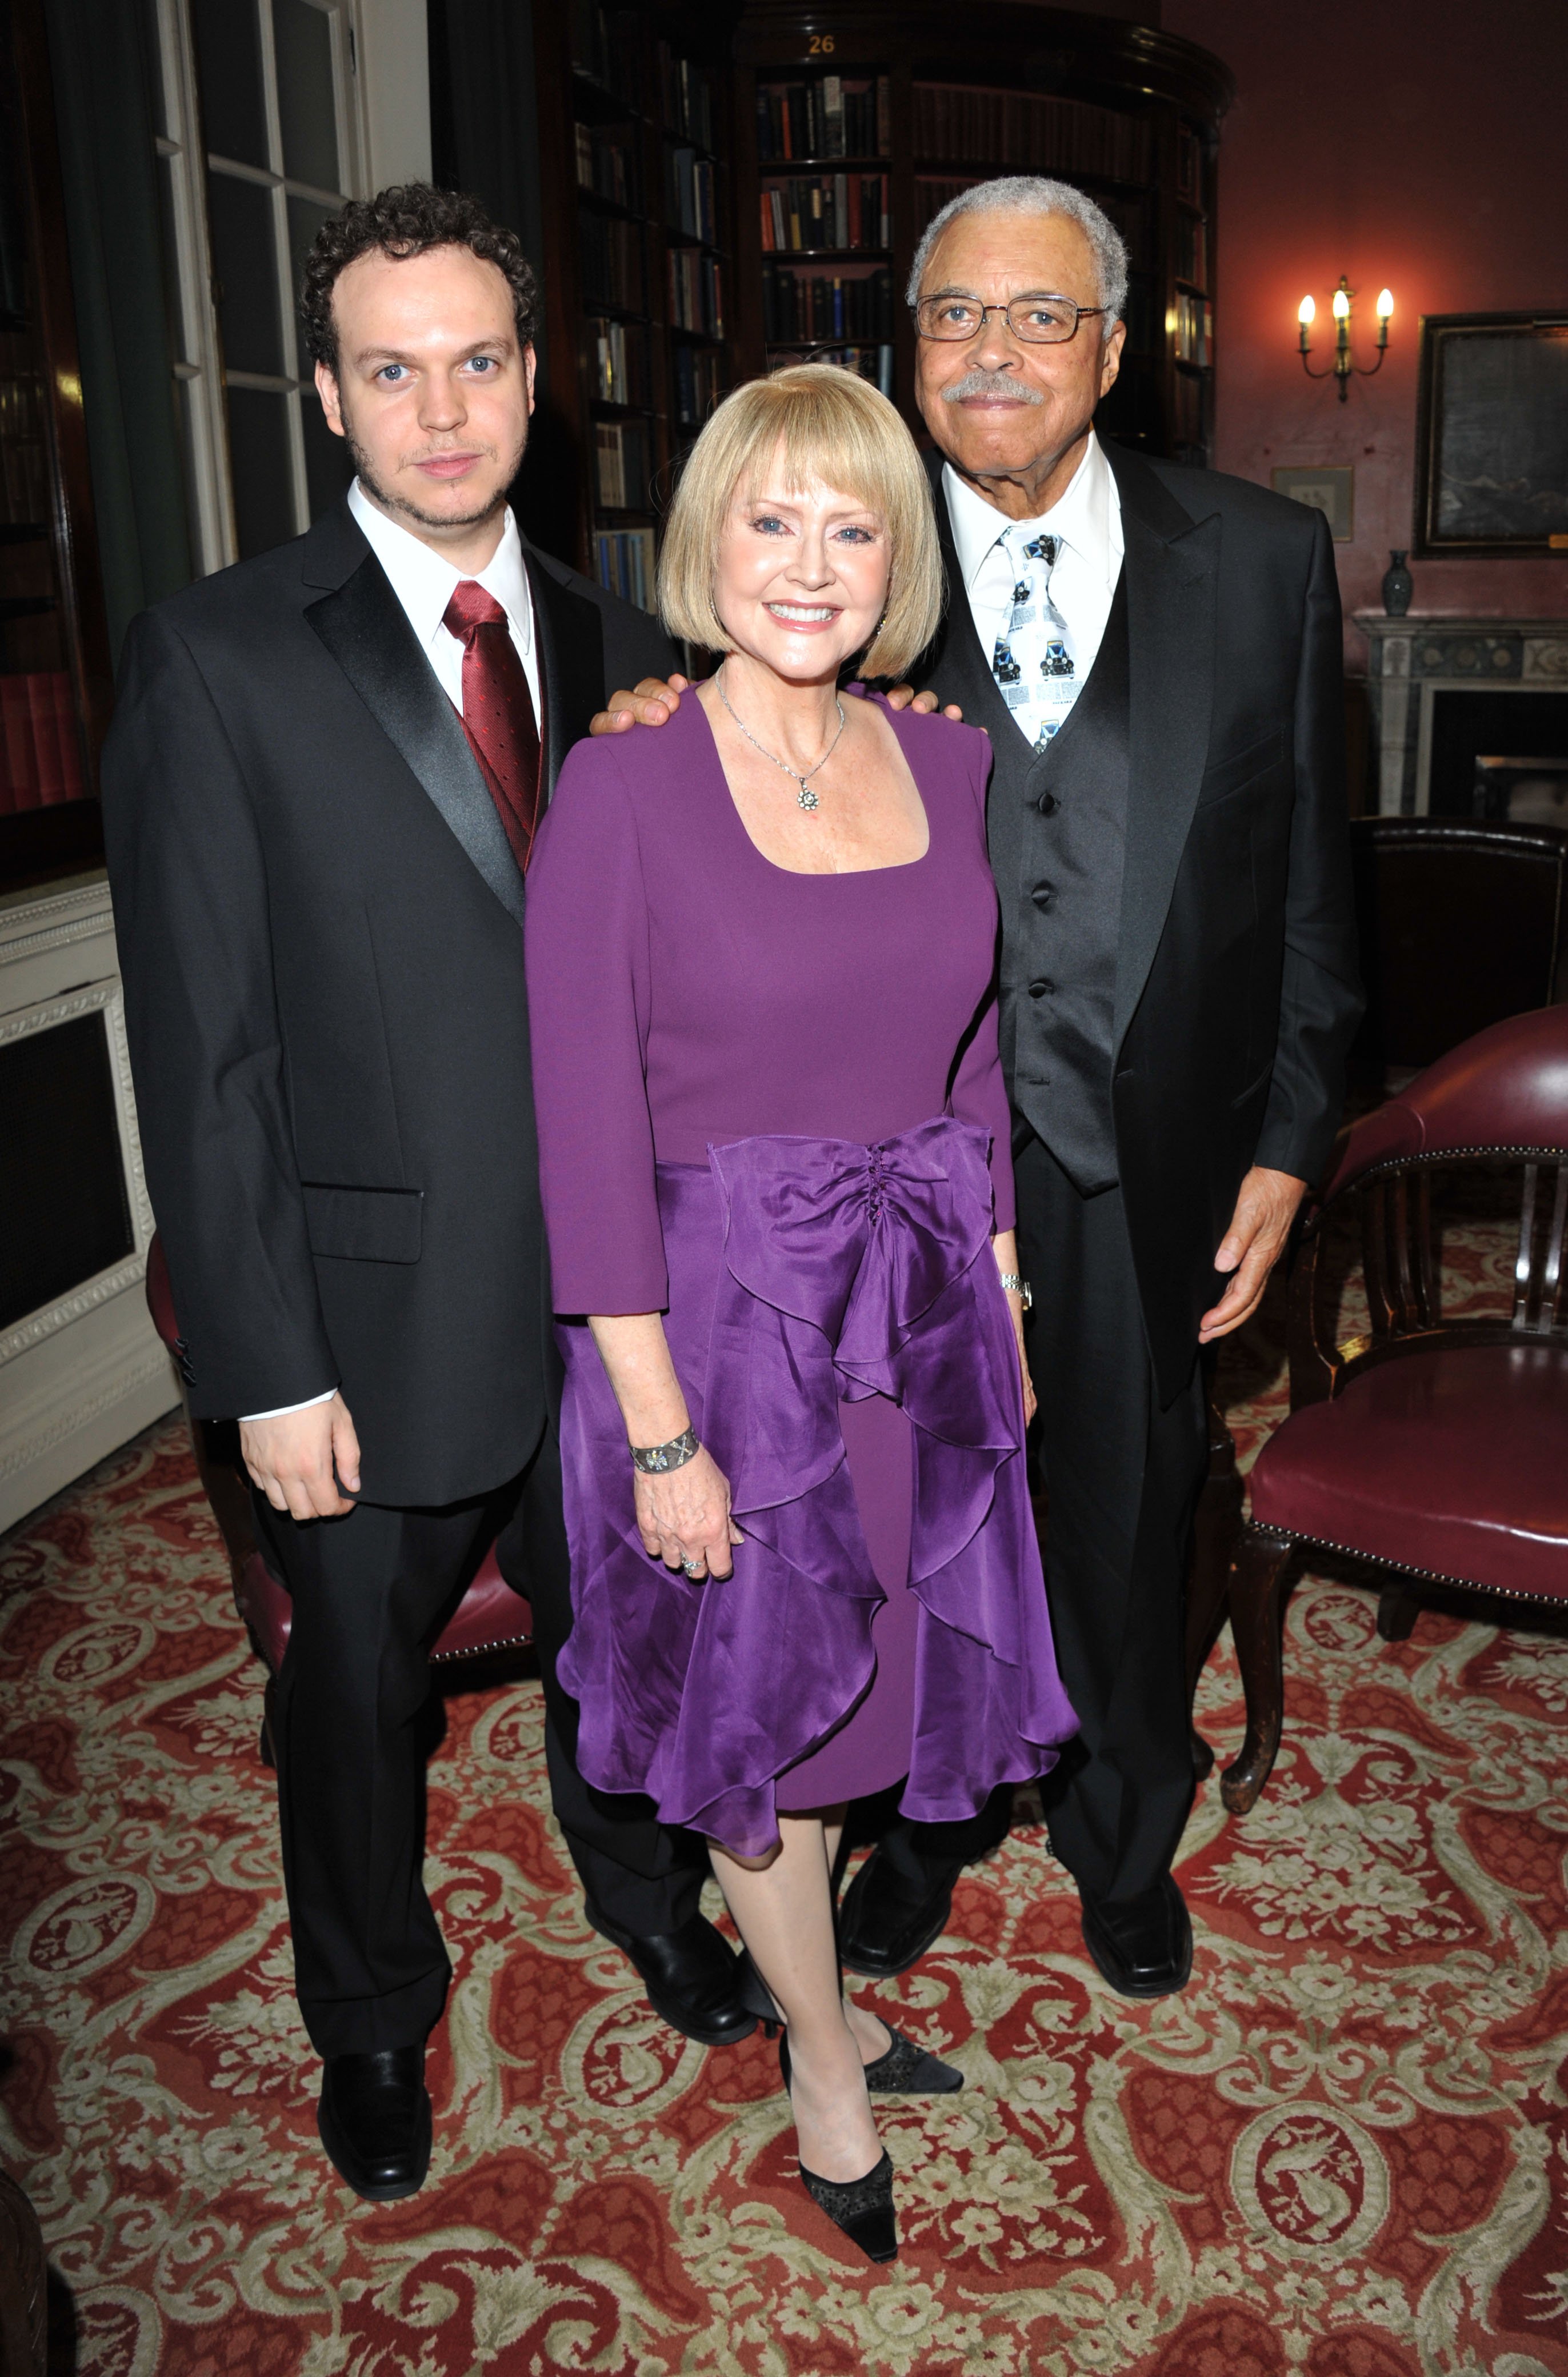 Flynn Earl Jones, Cecilia Hart, and James Earl Jones at the after-party for the opening of "Driving Miss Daisy" on October 5, 2011, in London | Source: Getty Images